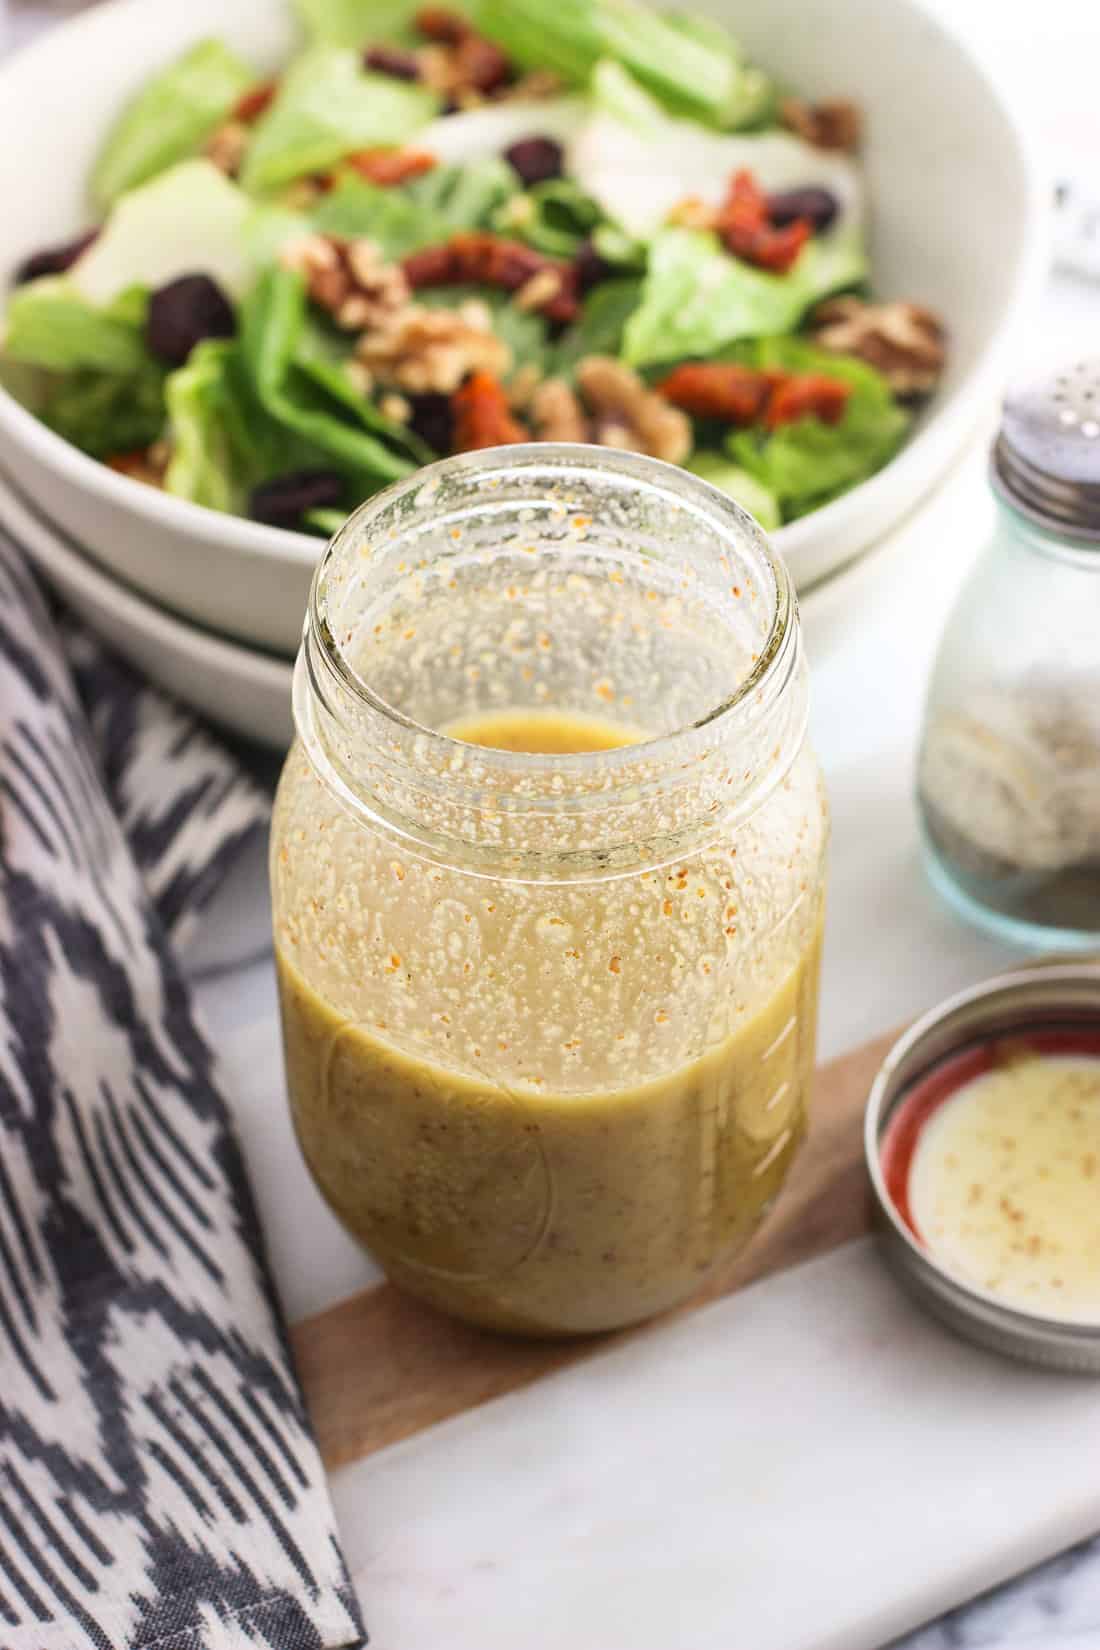 Shaken vinaigrette in a jar ready to be poured onto salad